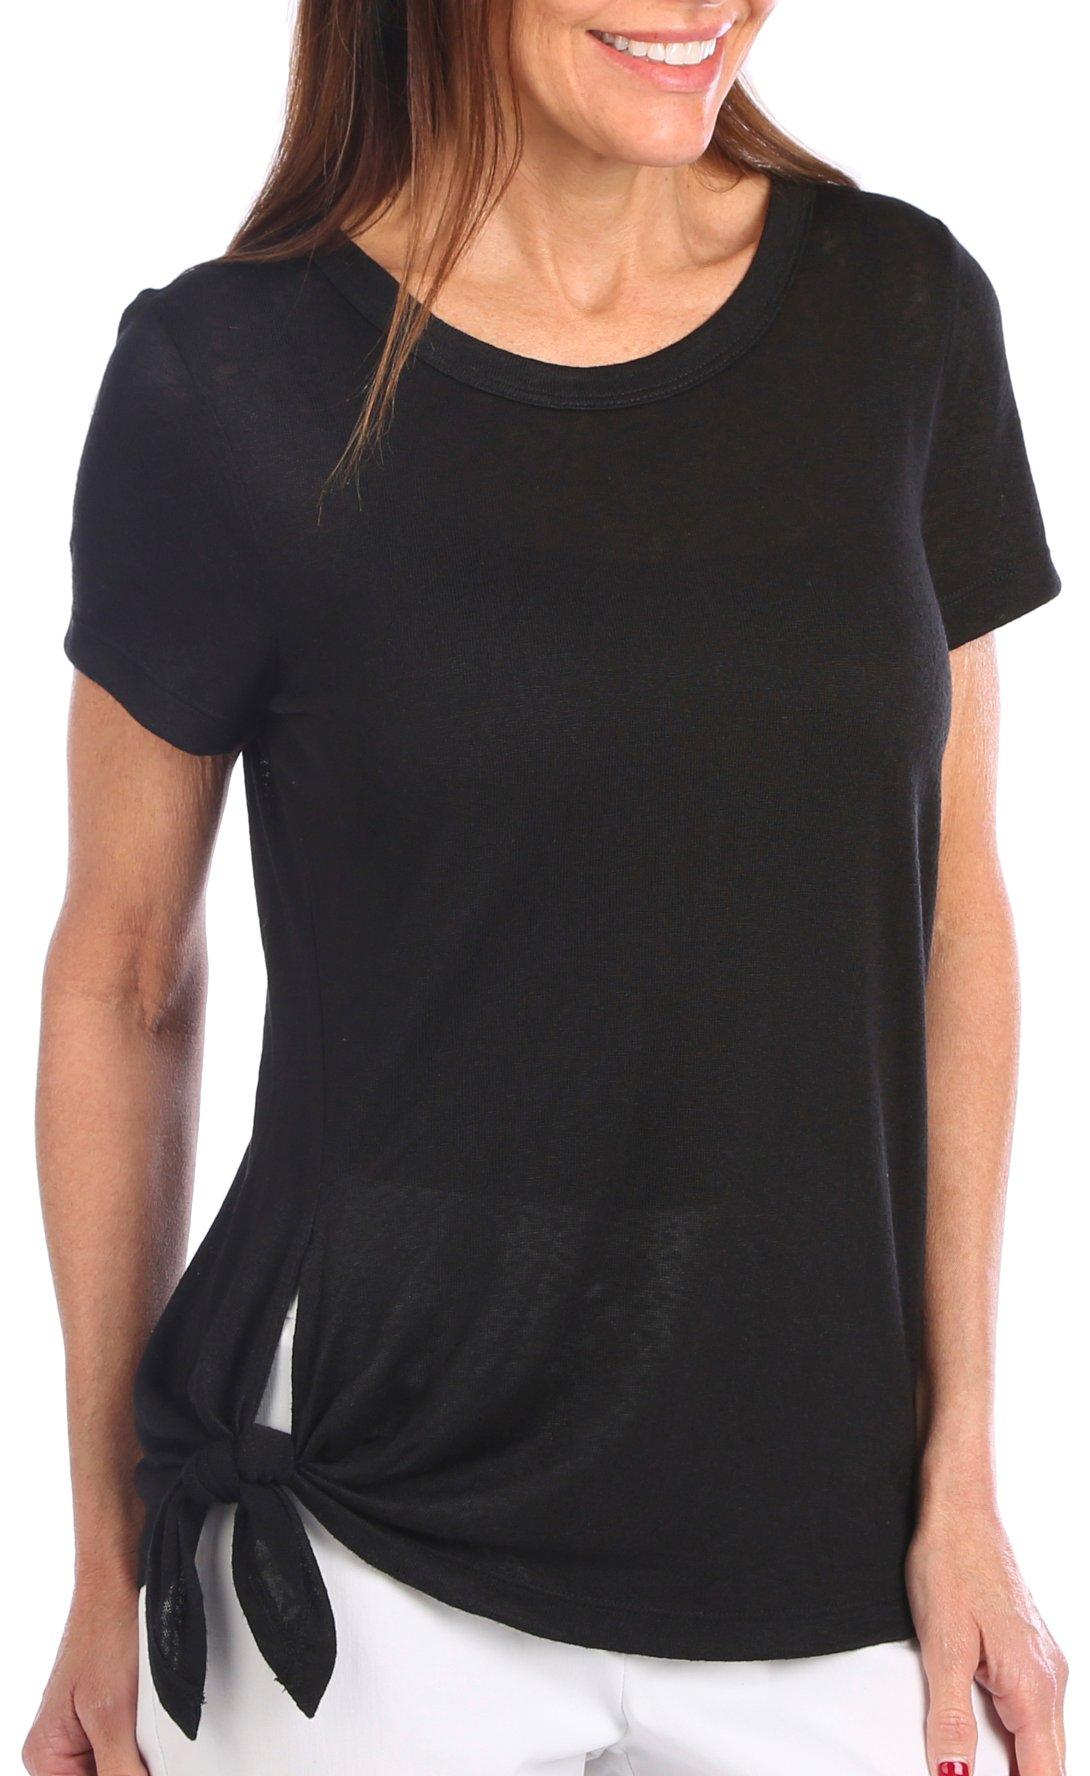 Womens Solid Round Neck Short Sleeve Top